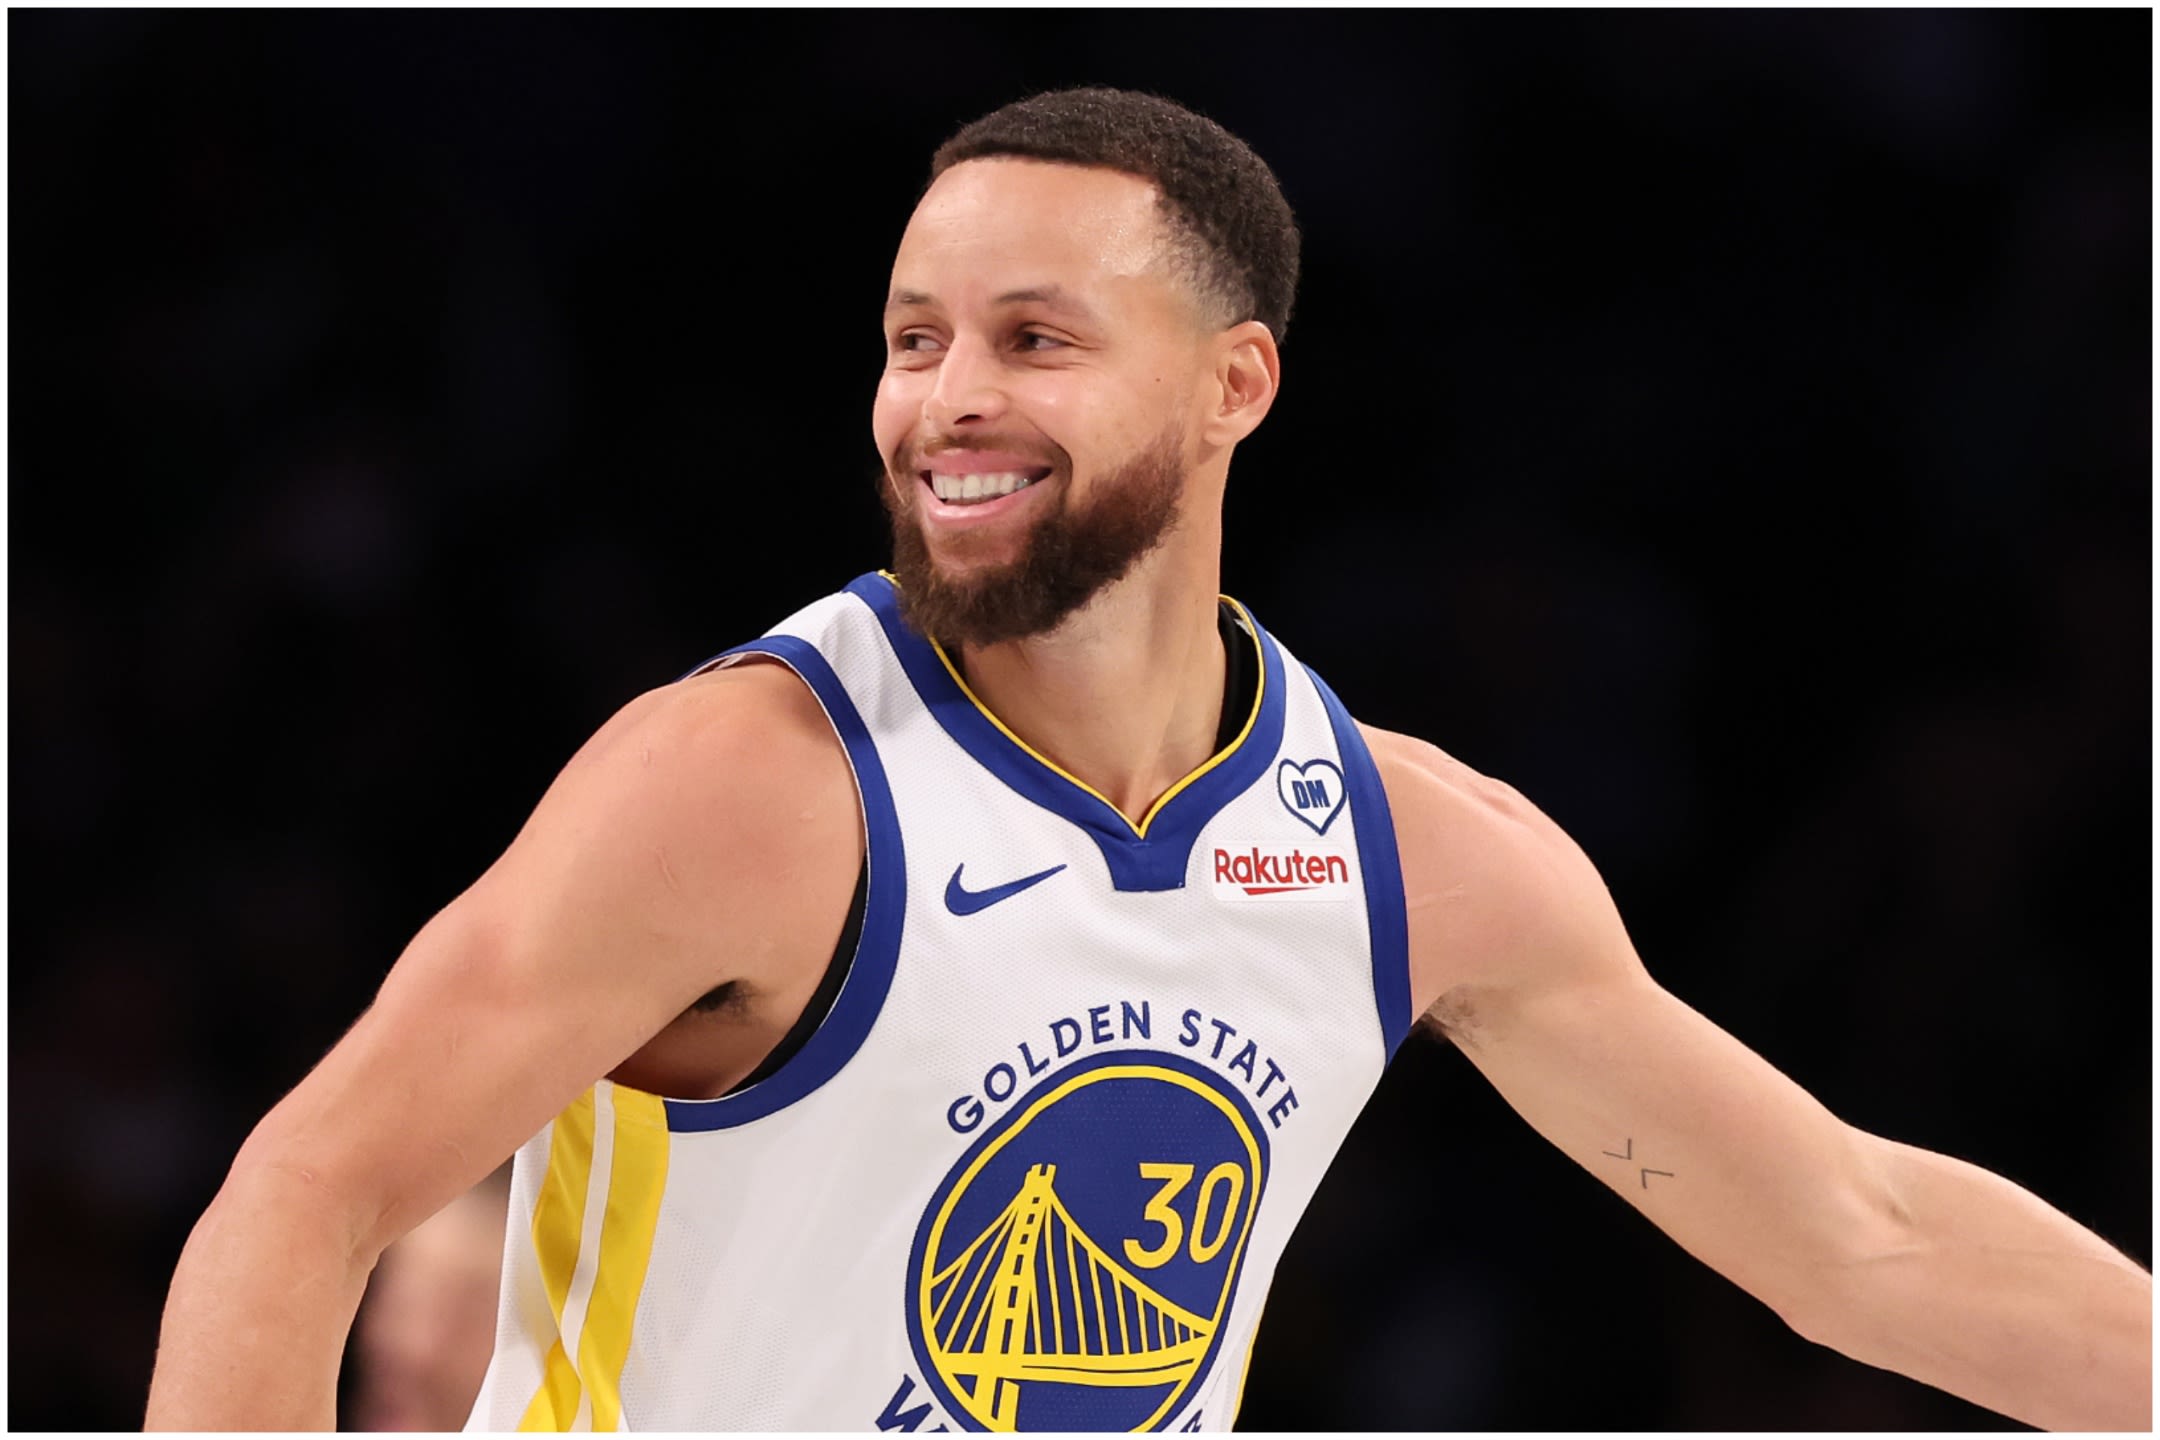 Stephen Curry and Erick Peyton’s Unanimous Media to Produce Animated Sports Movie ‘GOAT’ at Sony